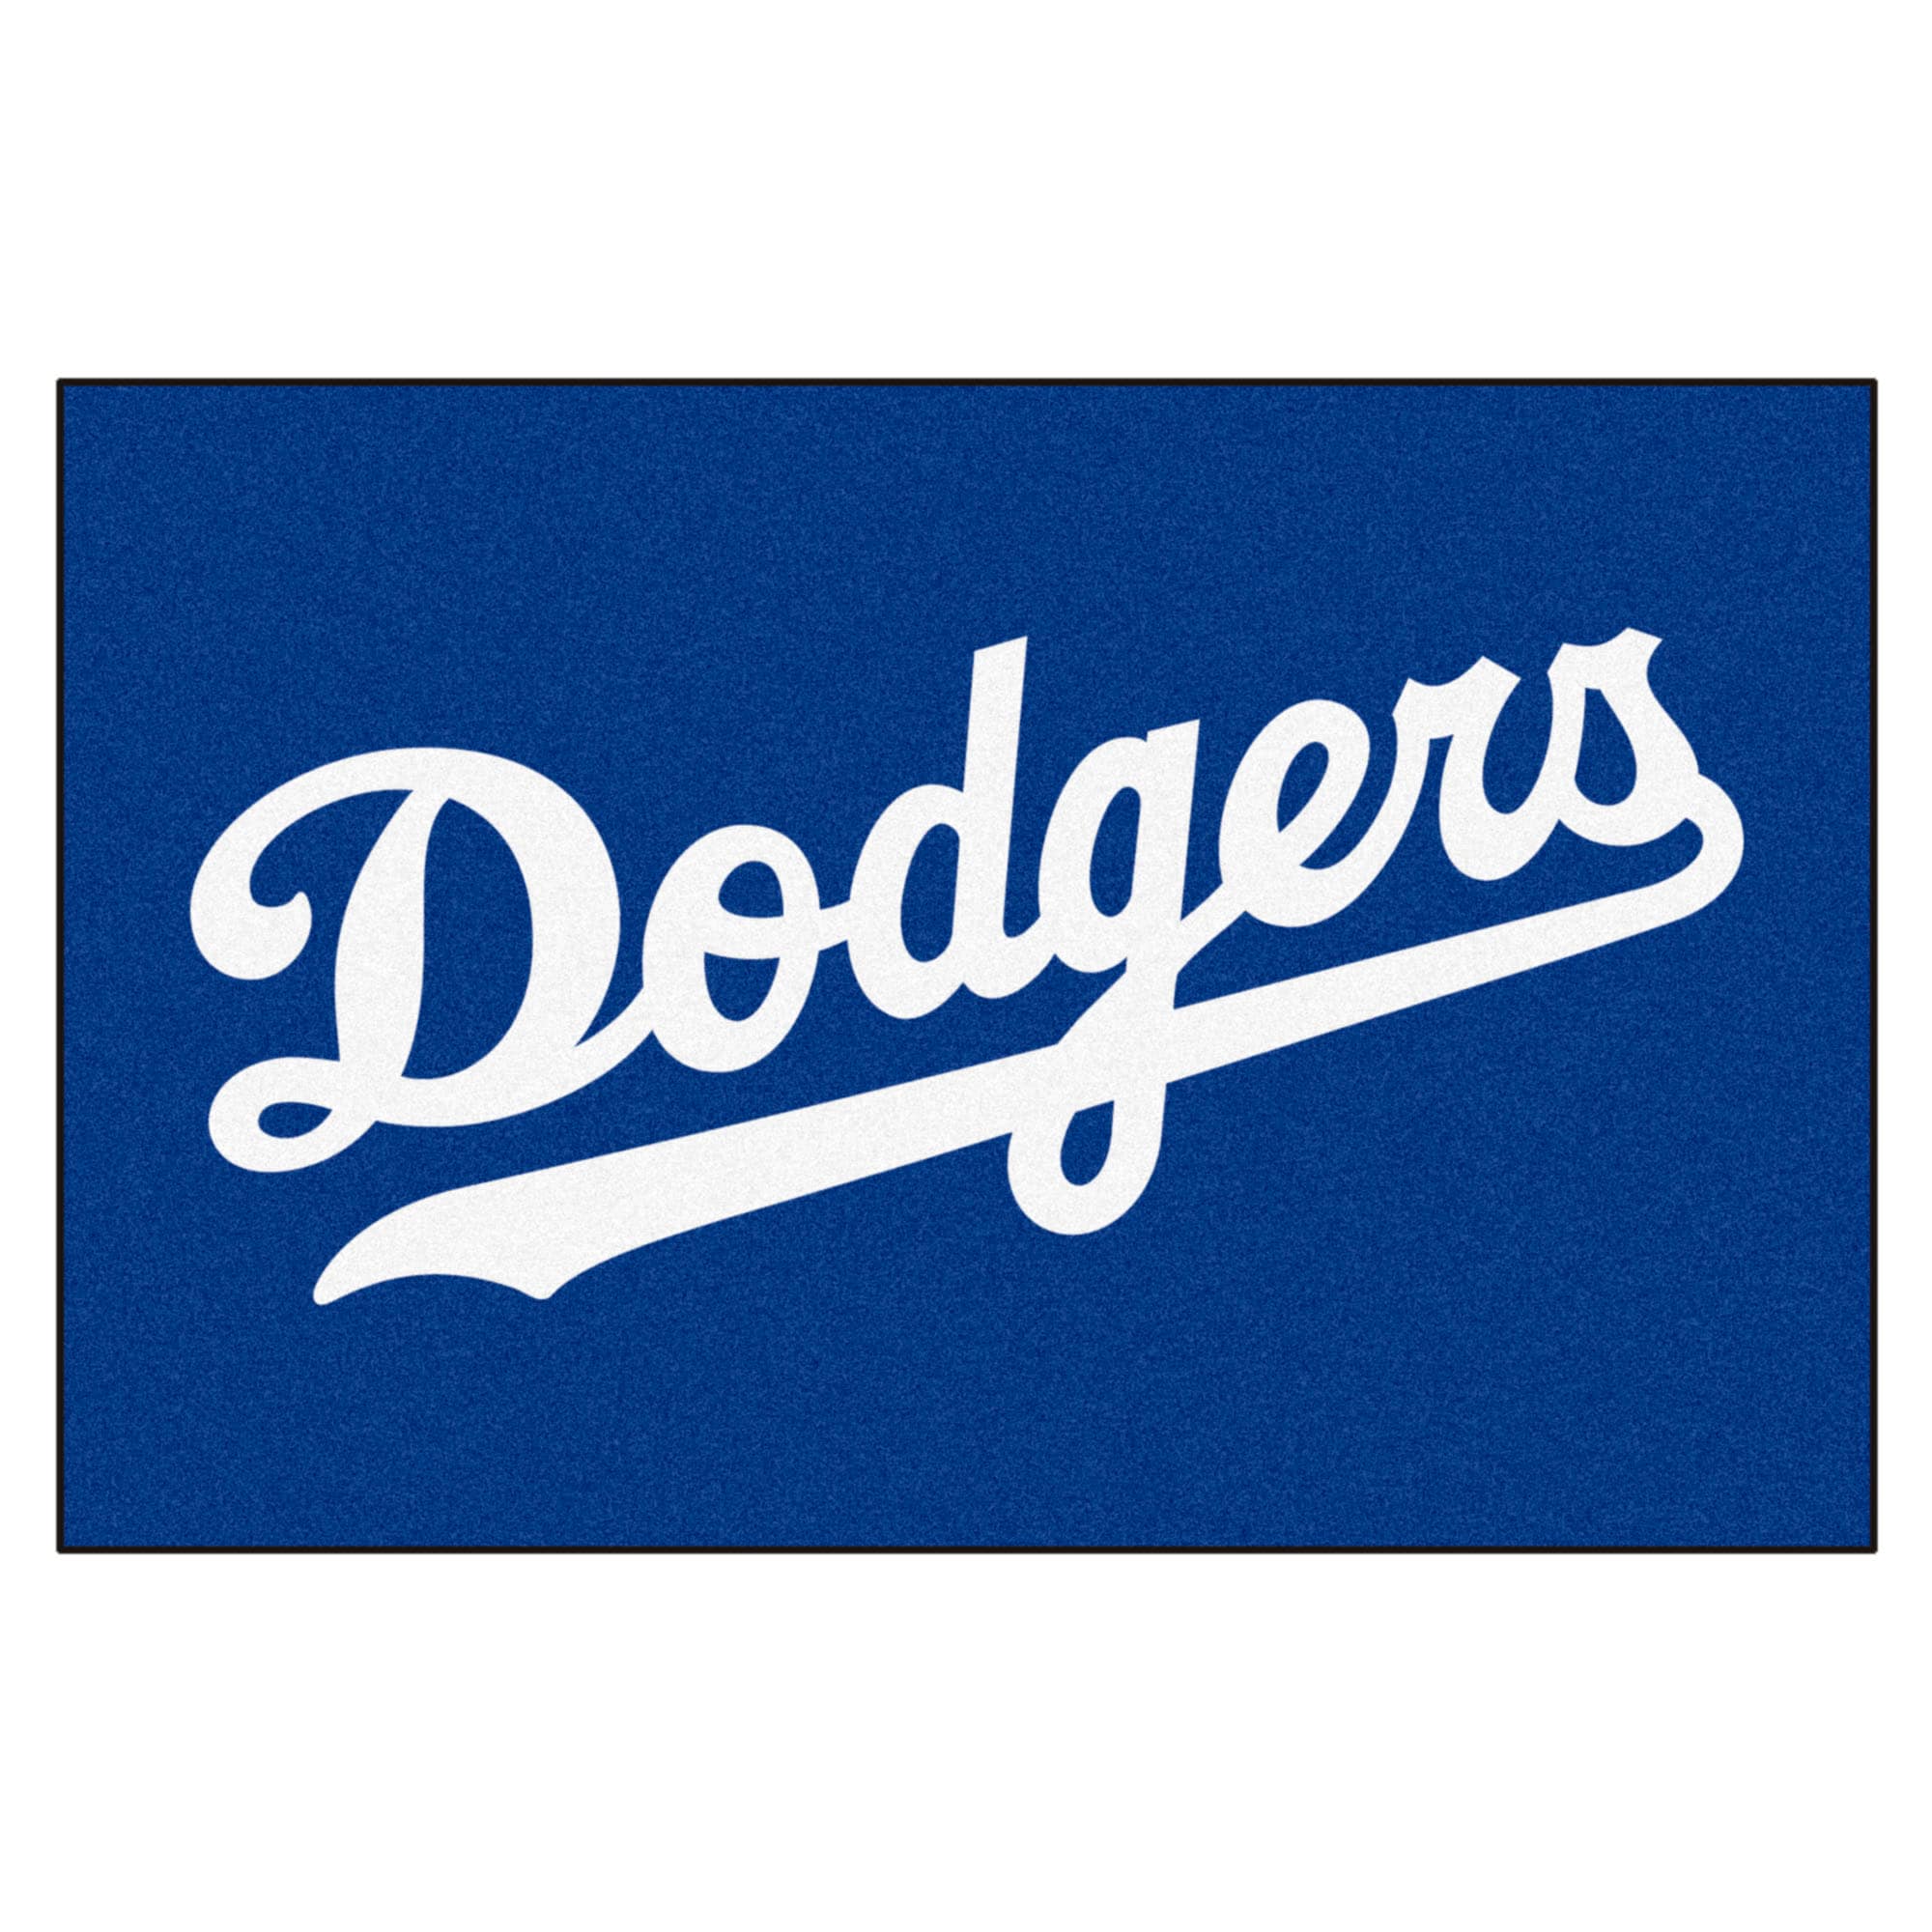 LOS ANGELES DODGERS Dodgers ON WHITE BACKGROUND MLB PATCH - (4 1/2 wide)